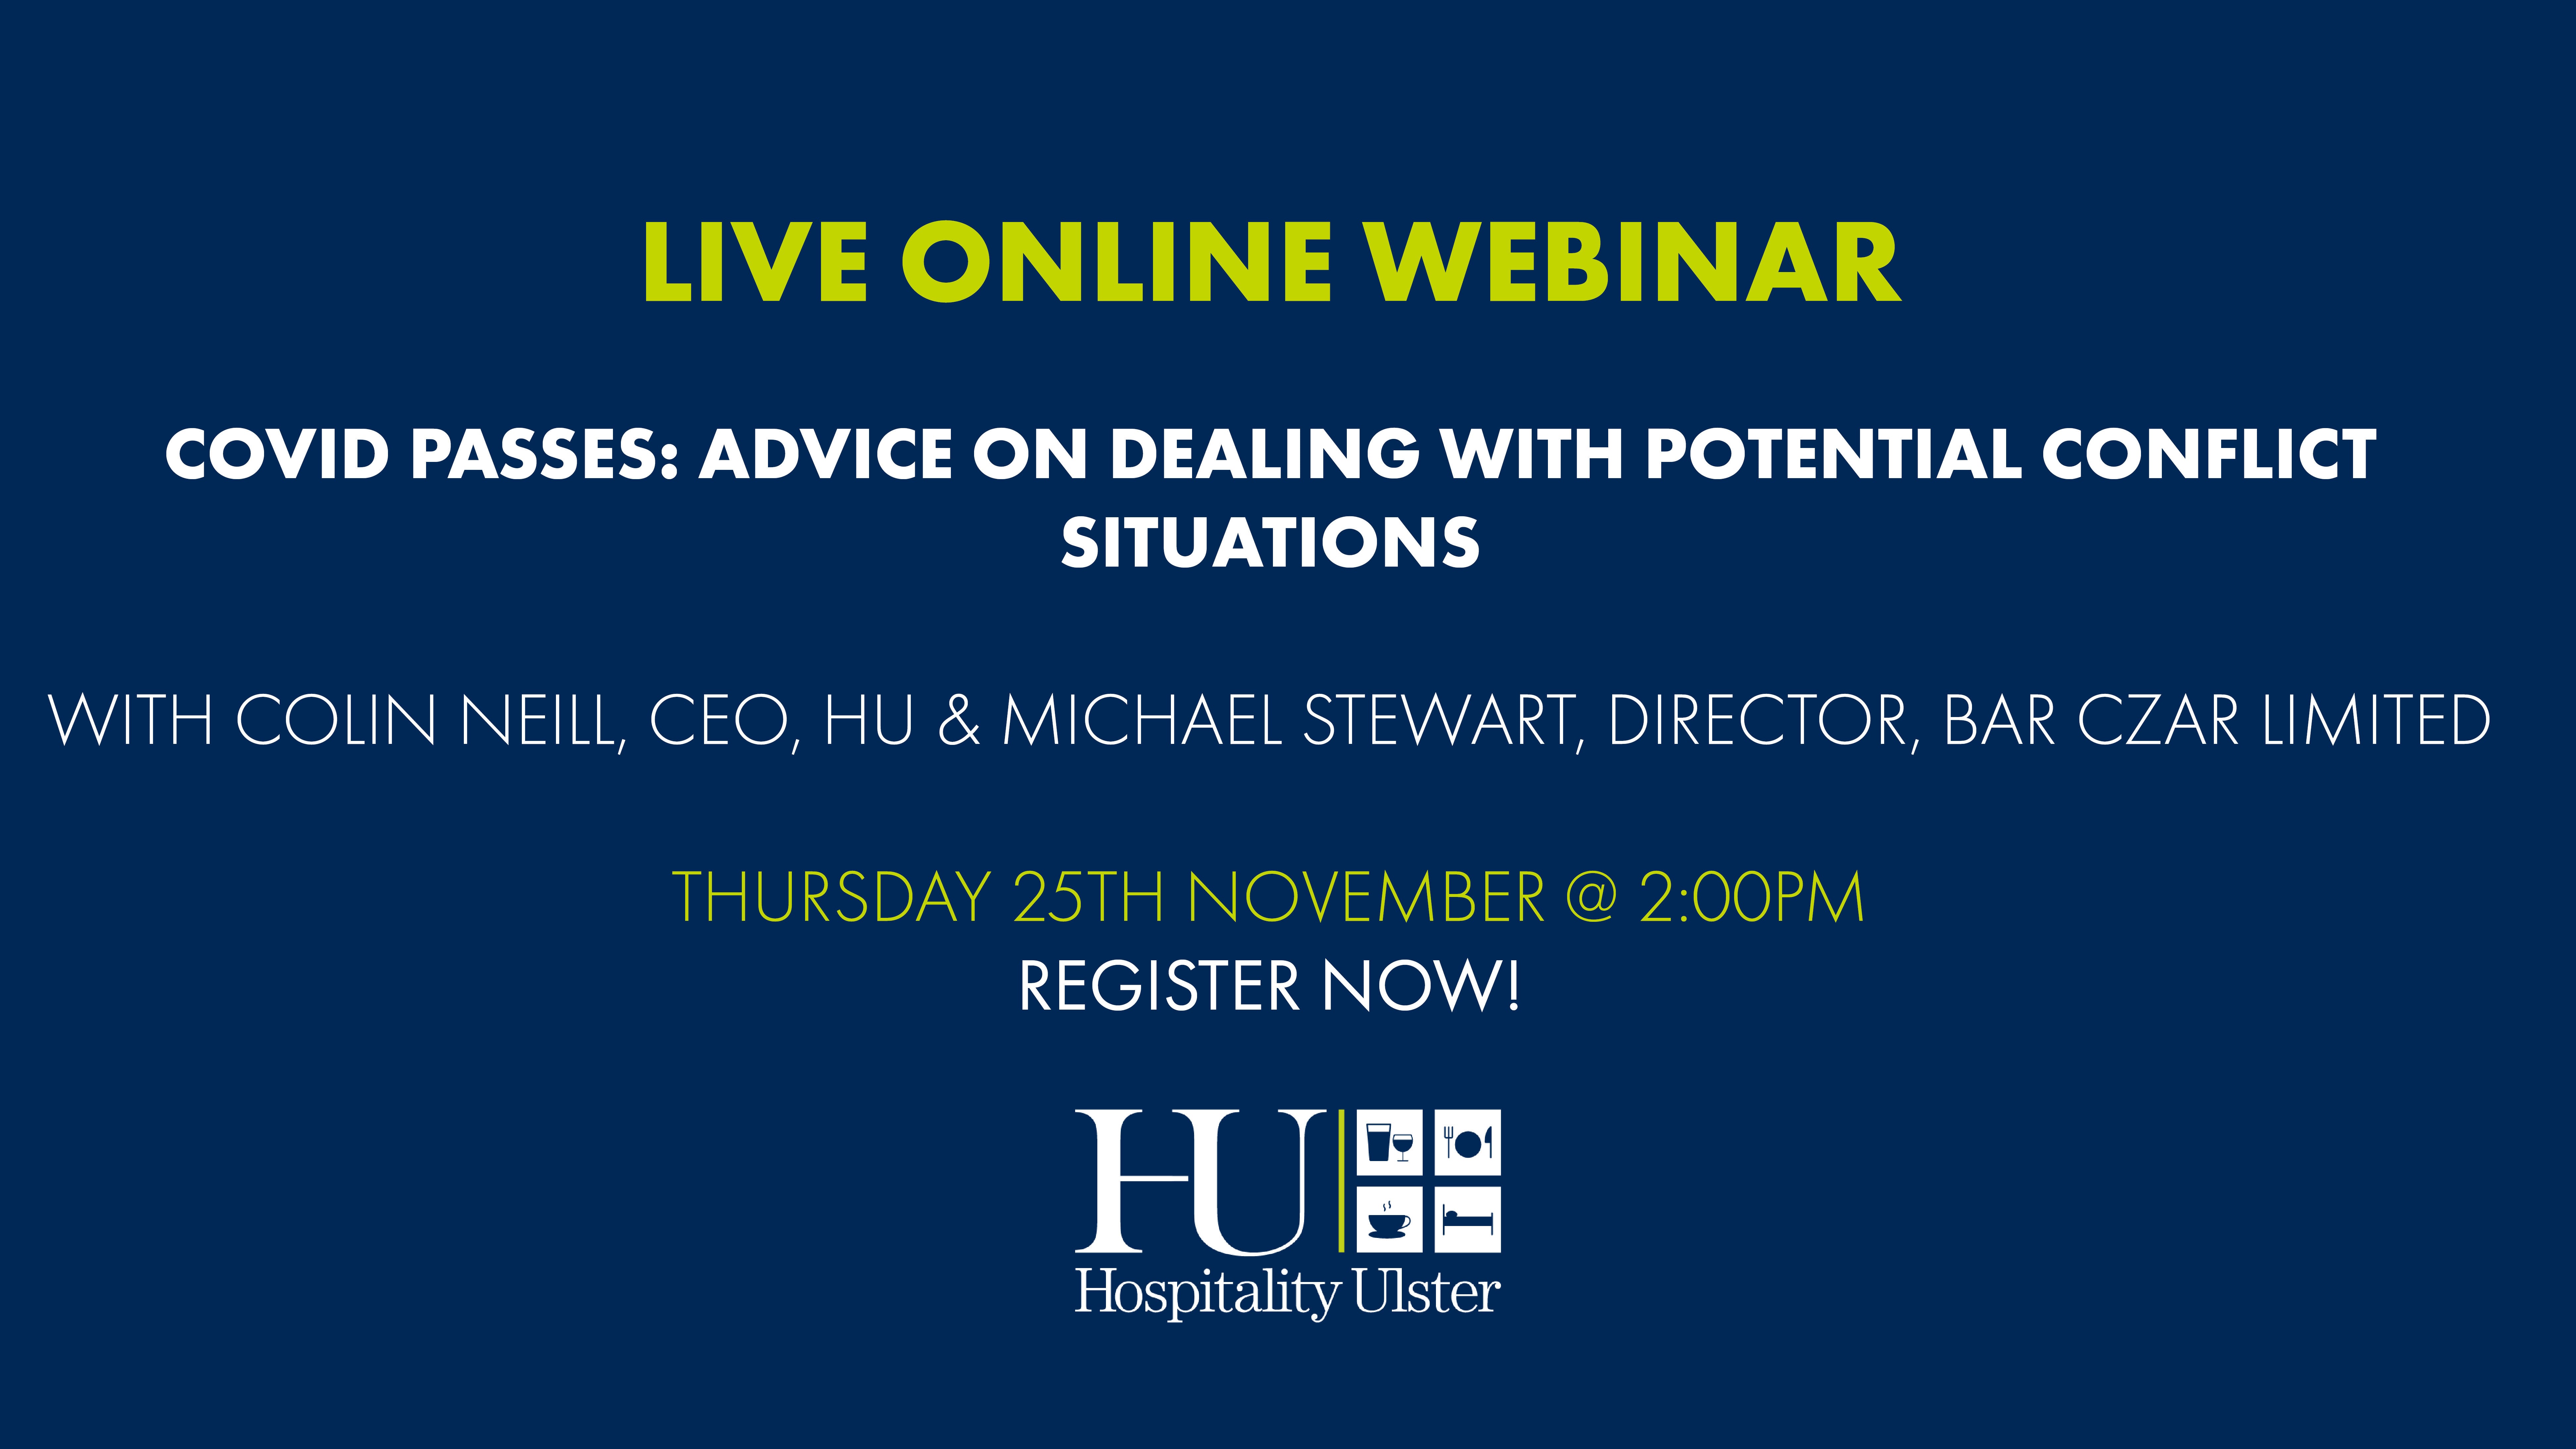 LIVE ONLINE WEBINAR - COVID PASSES - DEALING WITH POTENTIAL CONFLICT SITUATIONS